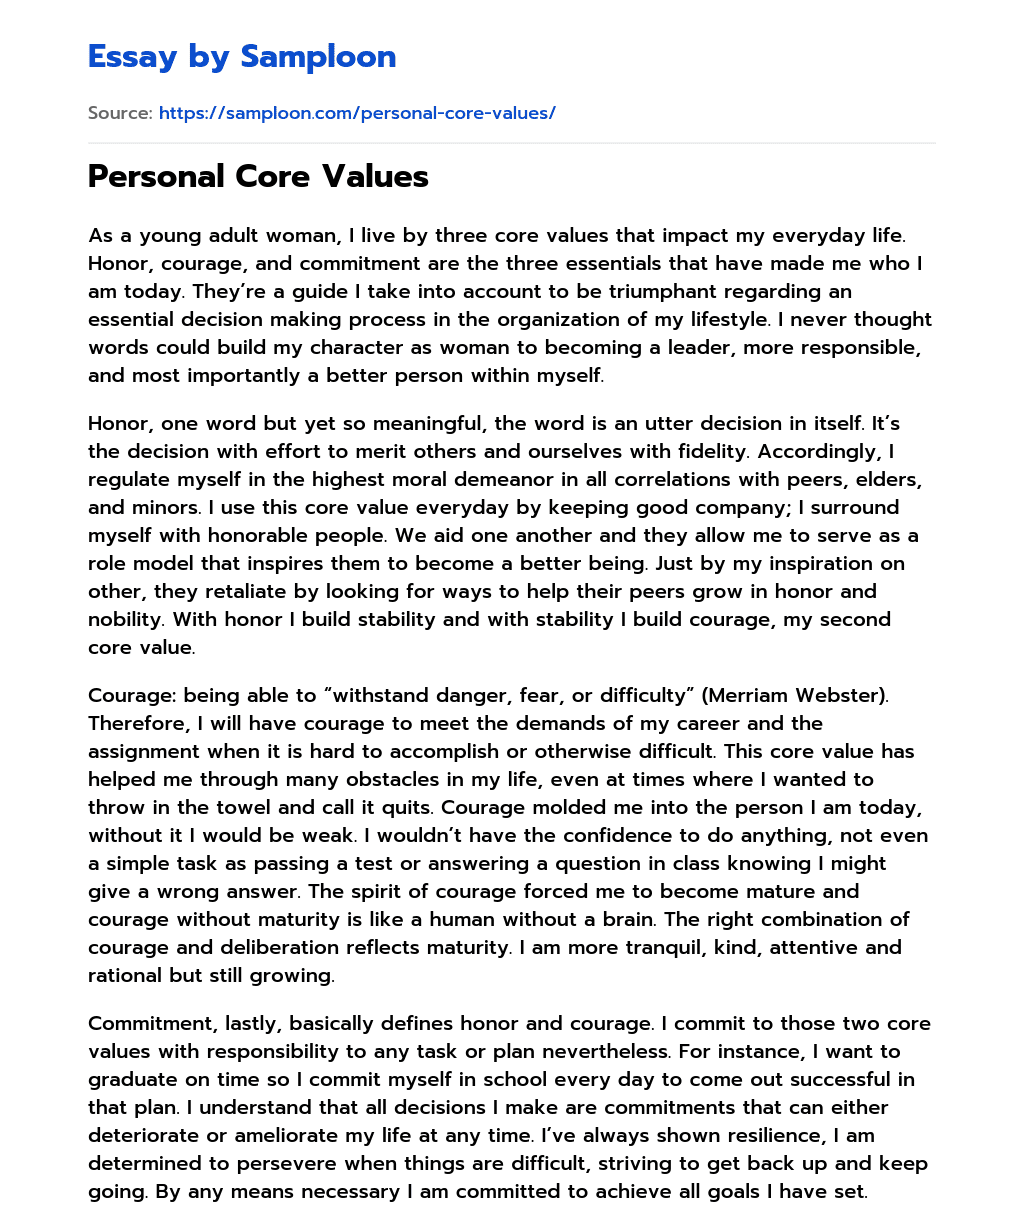 views and values essay